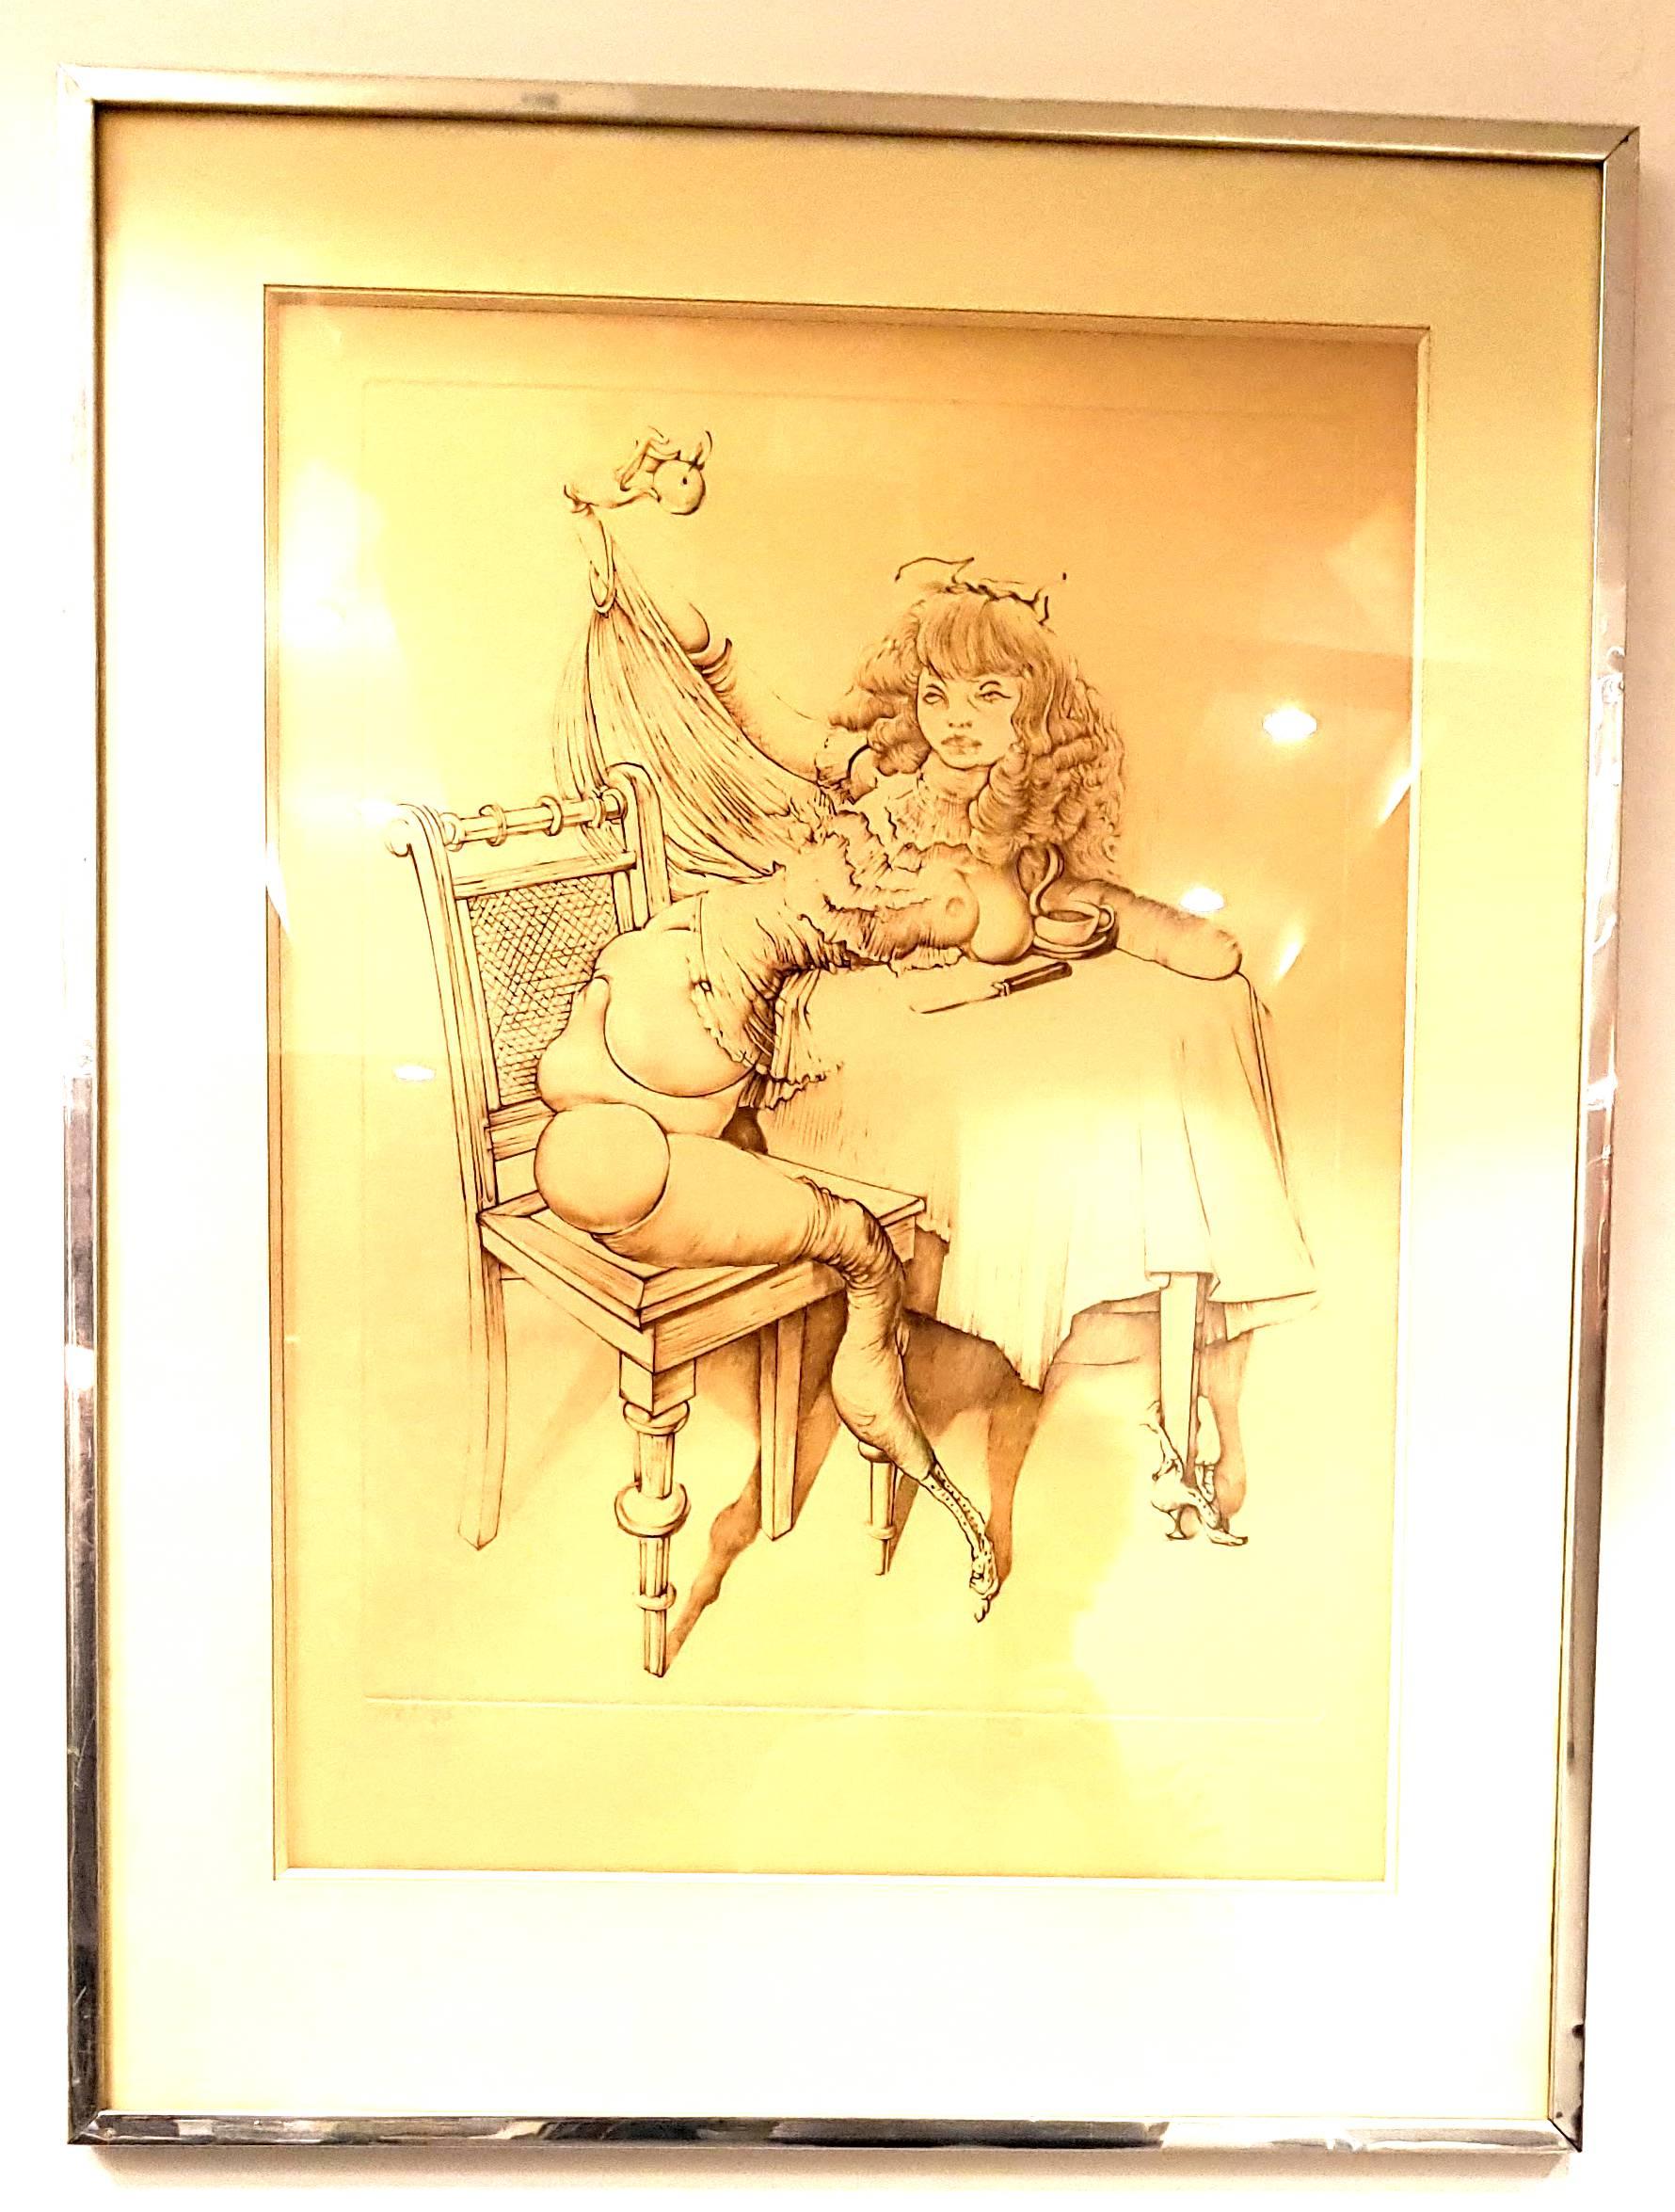 Hans BELLMER
Woman
Original Etching
Hand-Signed
Edition: 108 / 150
Dimensions: 51 x 38 cm
Circa 1970


Hans Bellmer was born in Kattowitz in 1902. At his father's insistence, he worked in a steel factory and a coal mine after finishing the